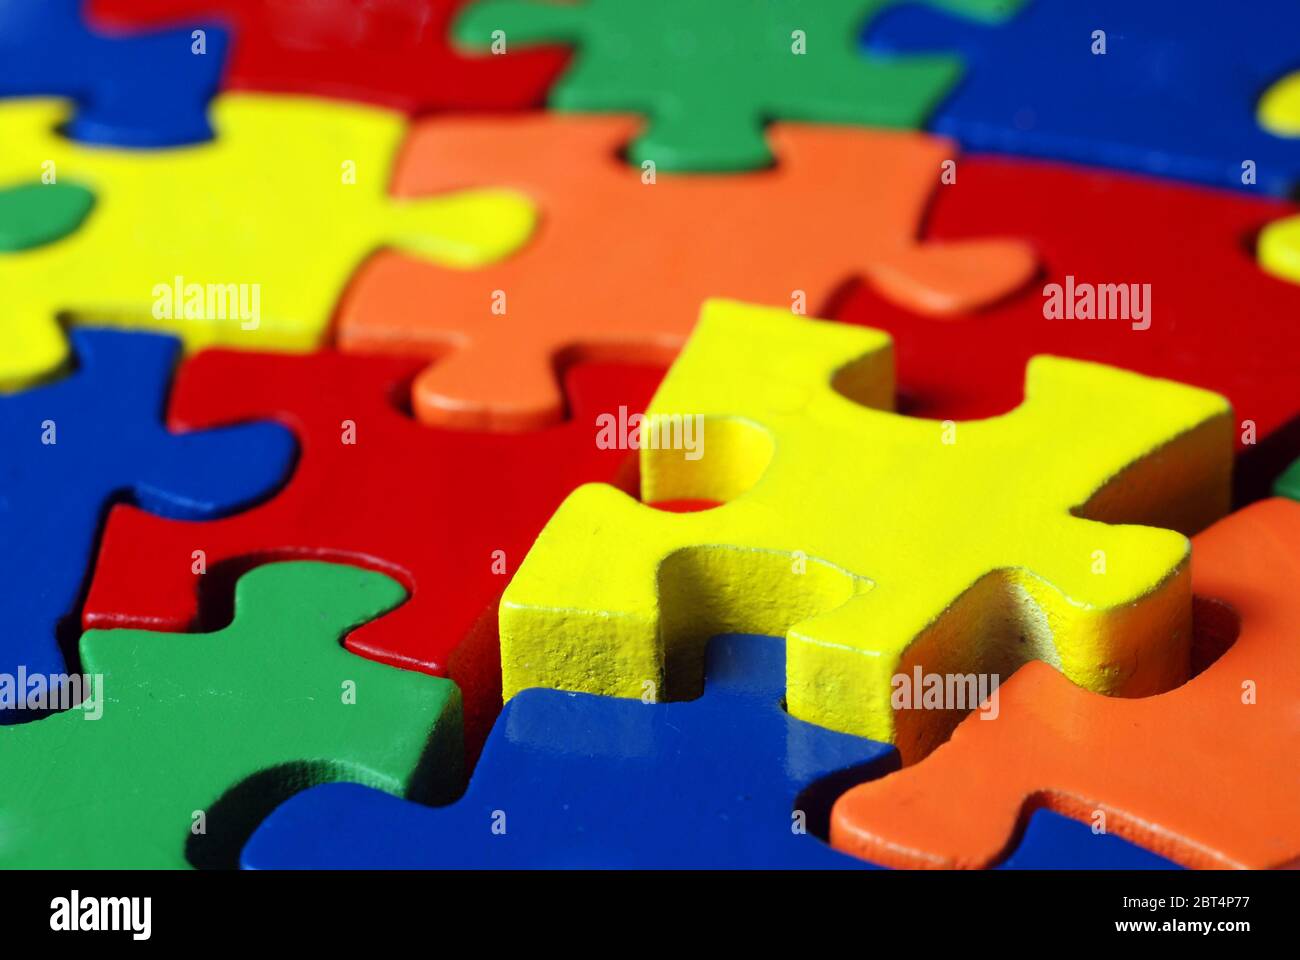 strategy, objects, game, tournament, play, playing, plays, played, colour, Stock Photo